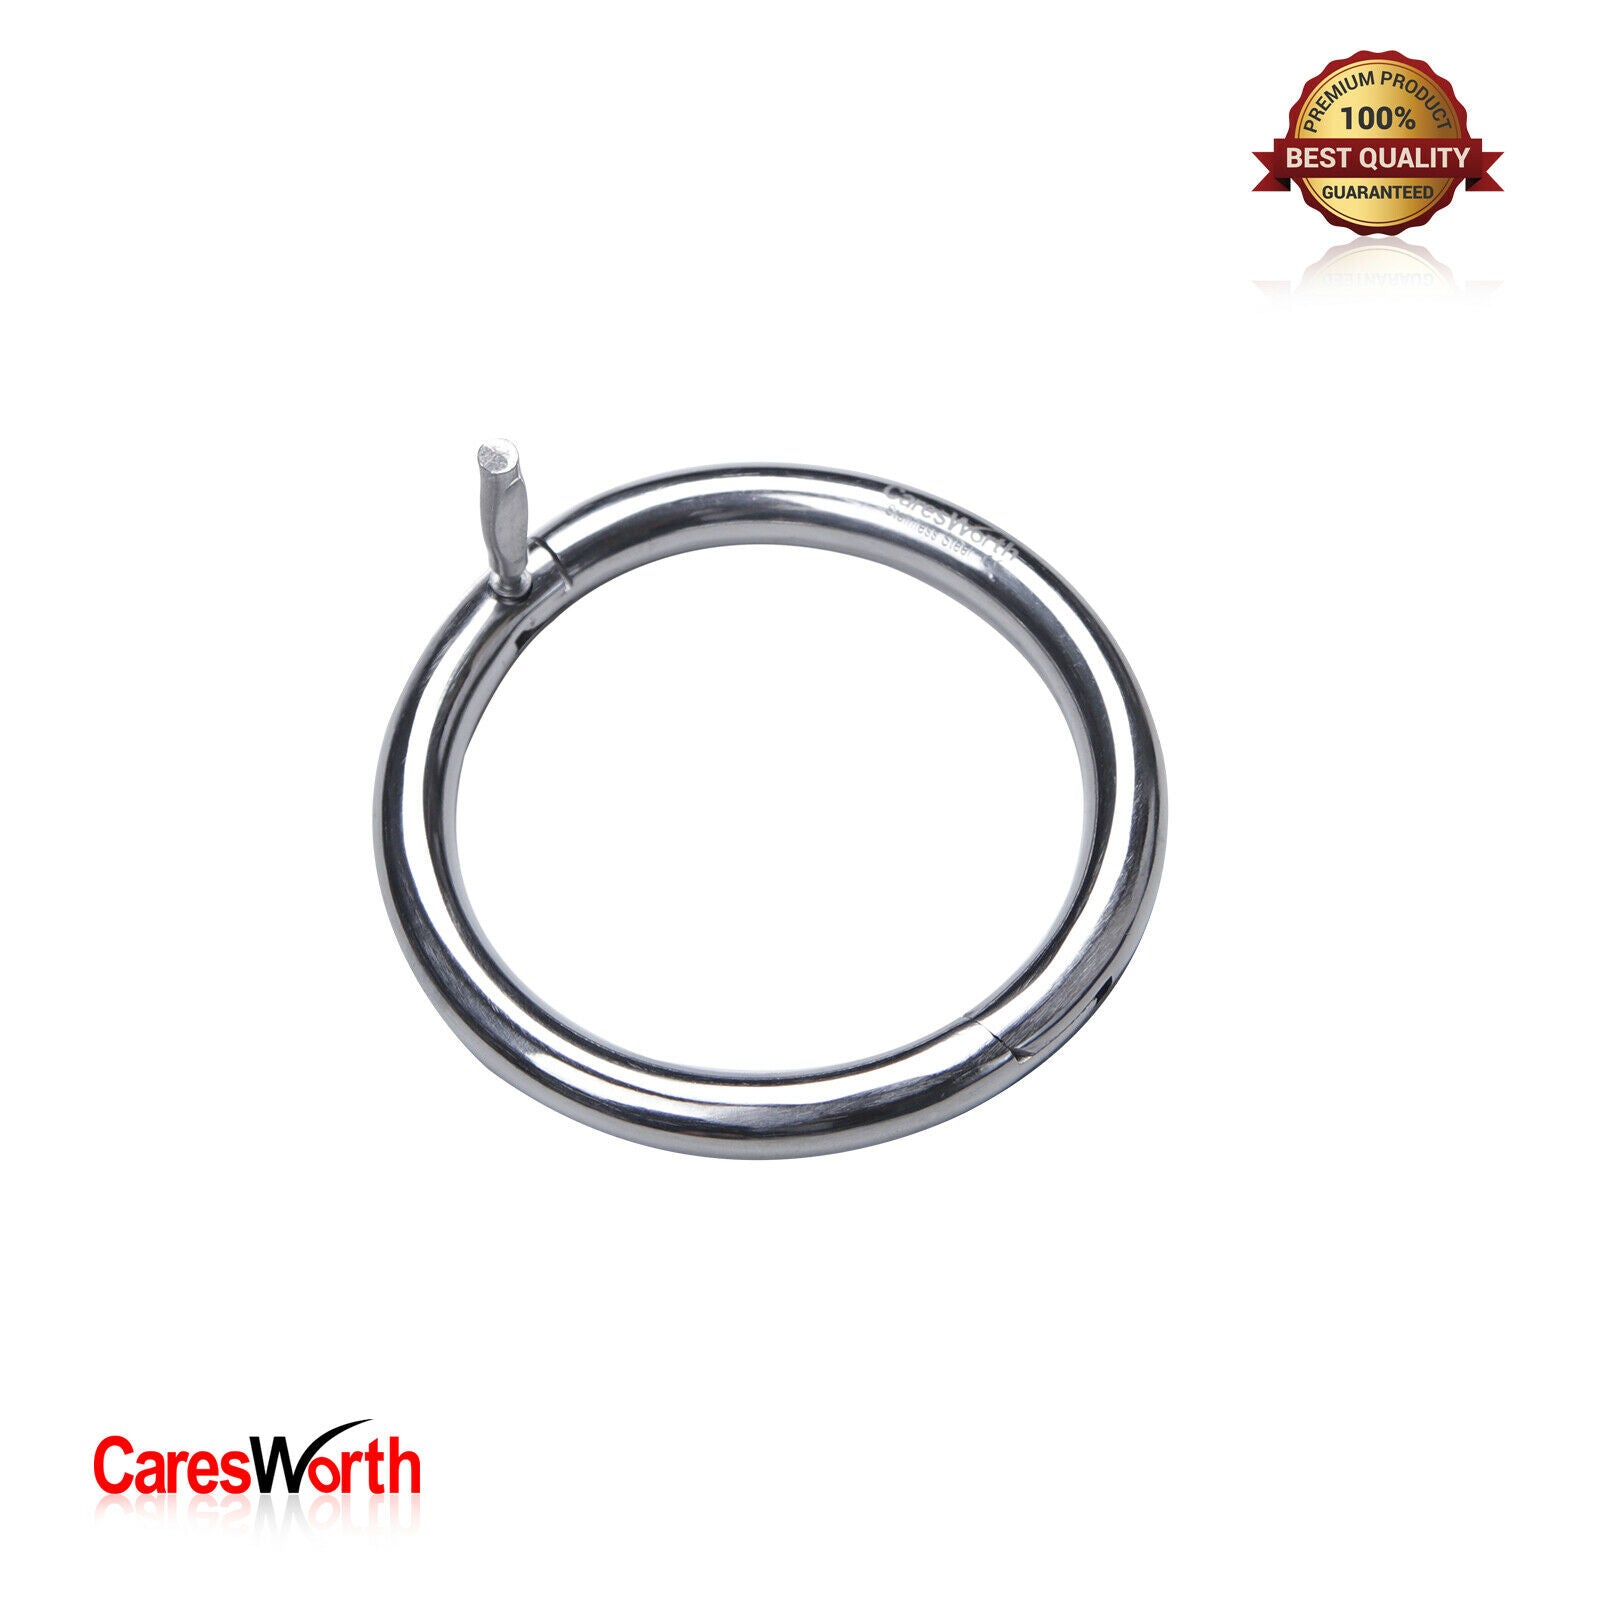 CaresWorth Bull Cow Nose Steel Ring with Free Key Veterinary Cattle 3" Farm